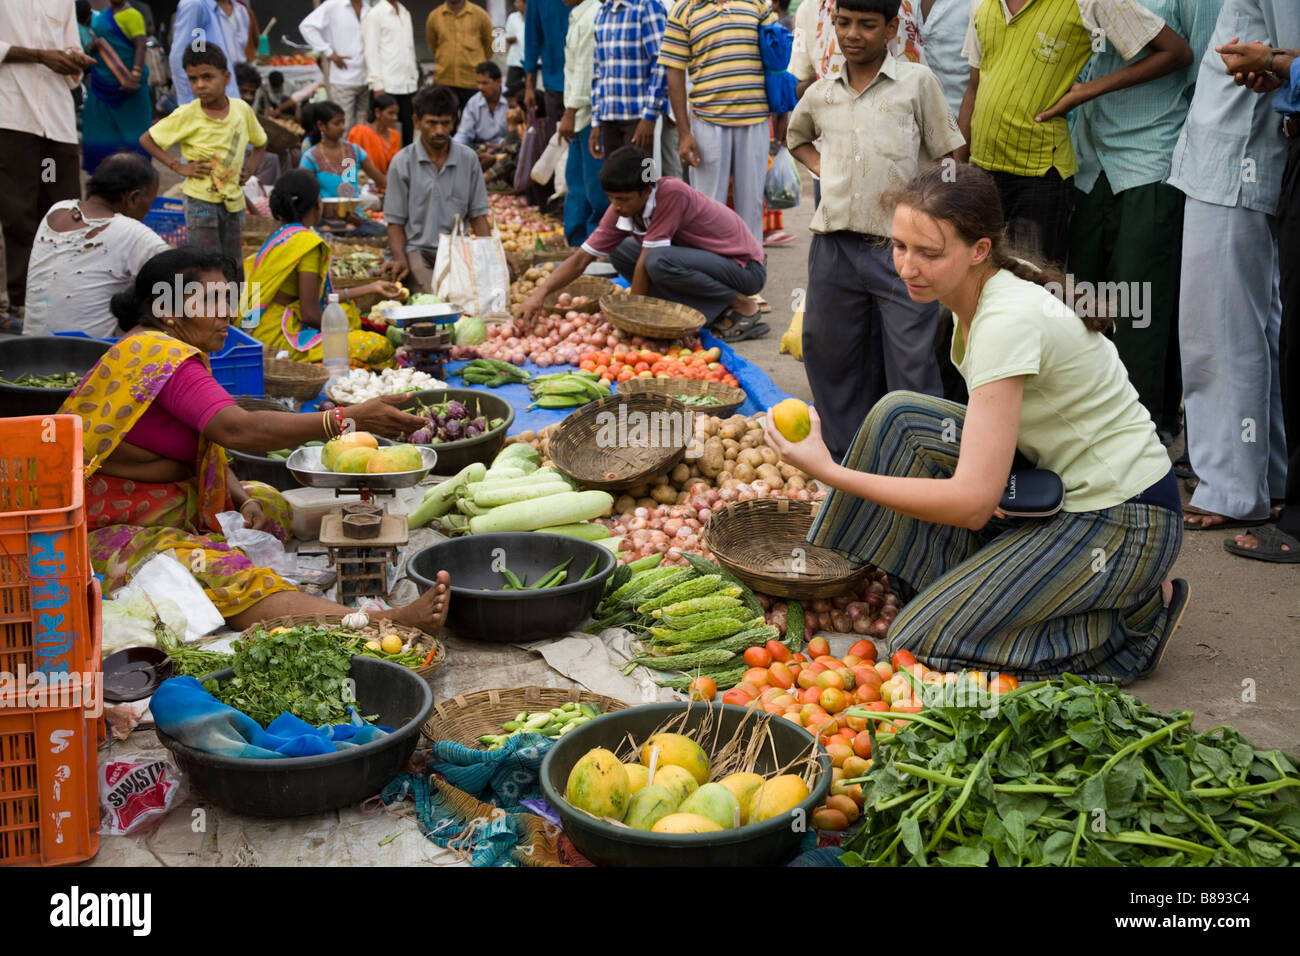 Western woman tourist choosing and buying fruit and vegetables / buys food at a local market stall. Hazira, Surat, Gujarat. India. Stock Photo